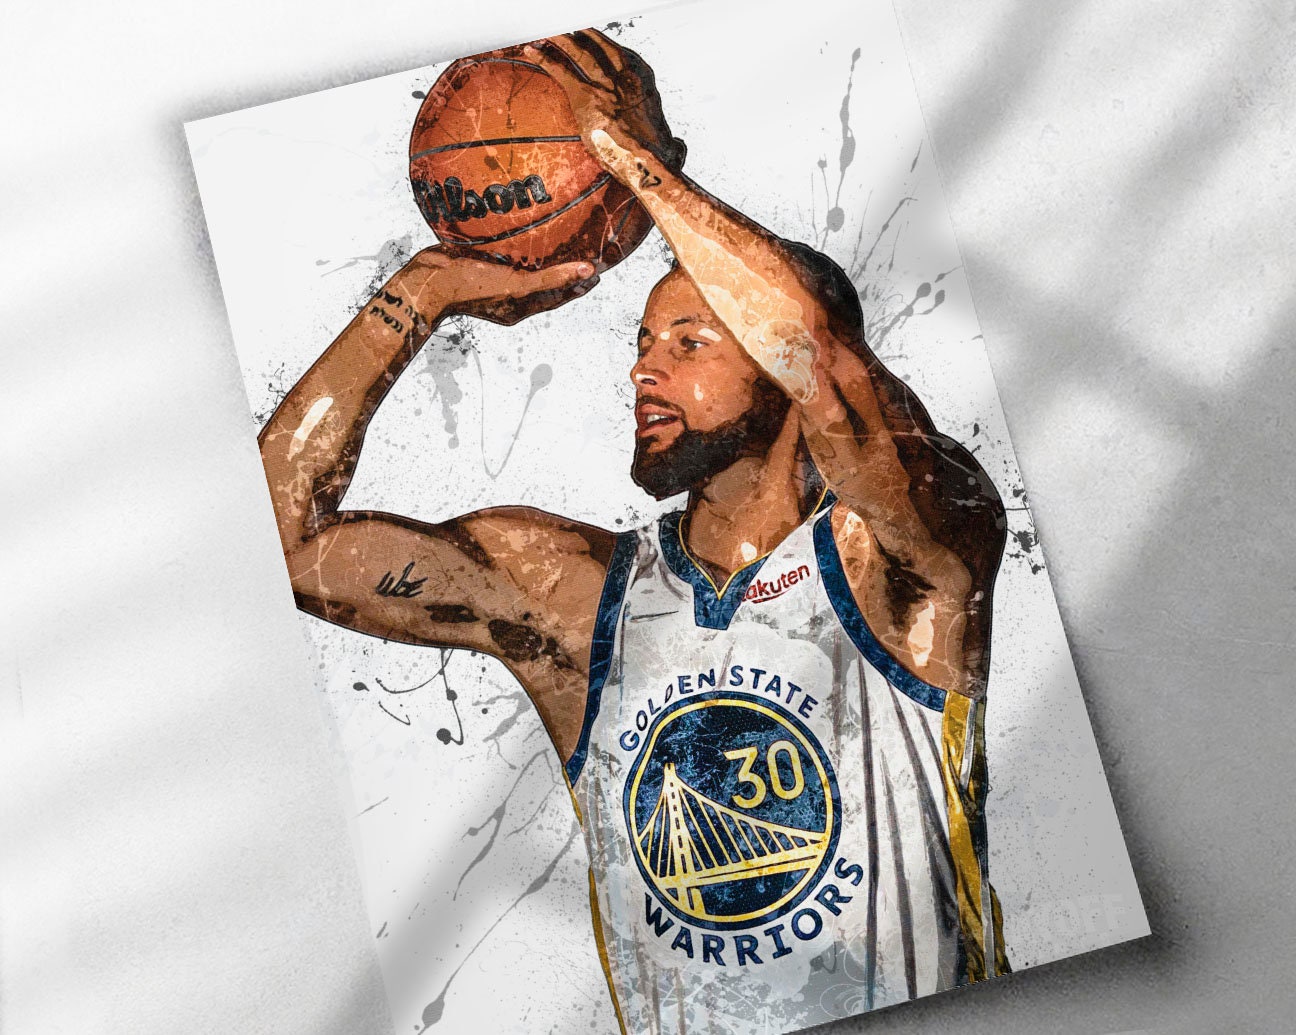 Steph Curry Posters for Walls Golden State Warriors Poster Sports  Basketball Superstar Canvas Wall Art Modern Inspirational Wall Decor Print  Painting